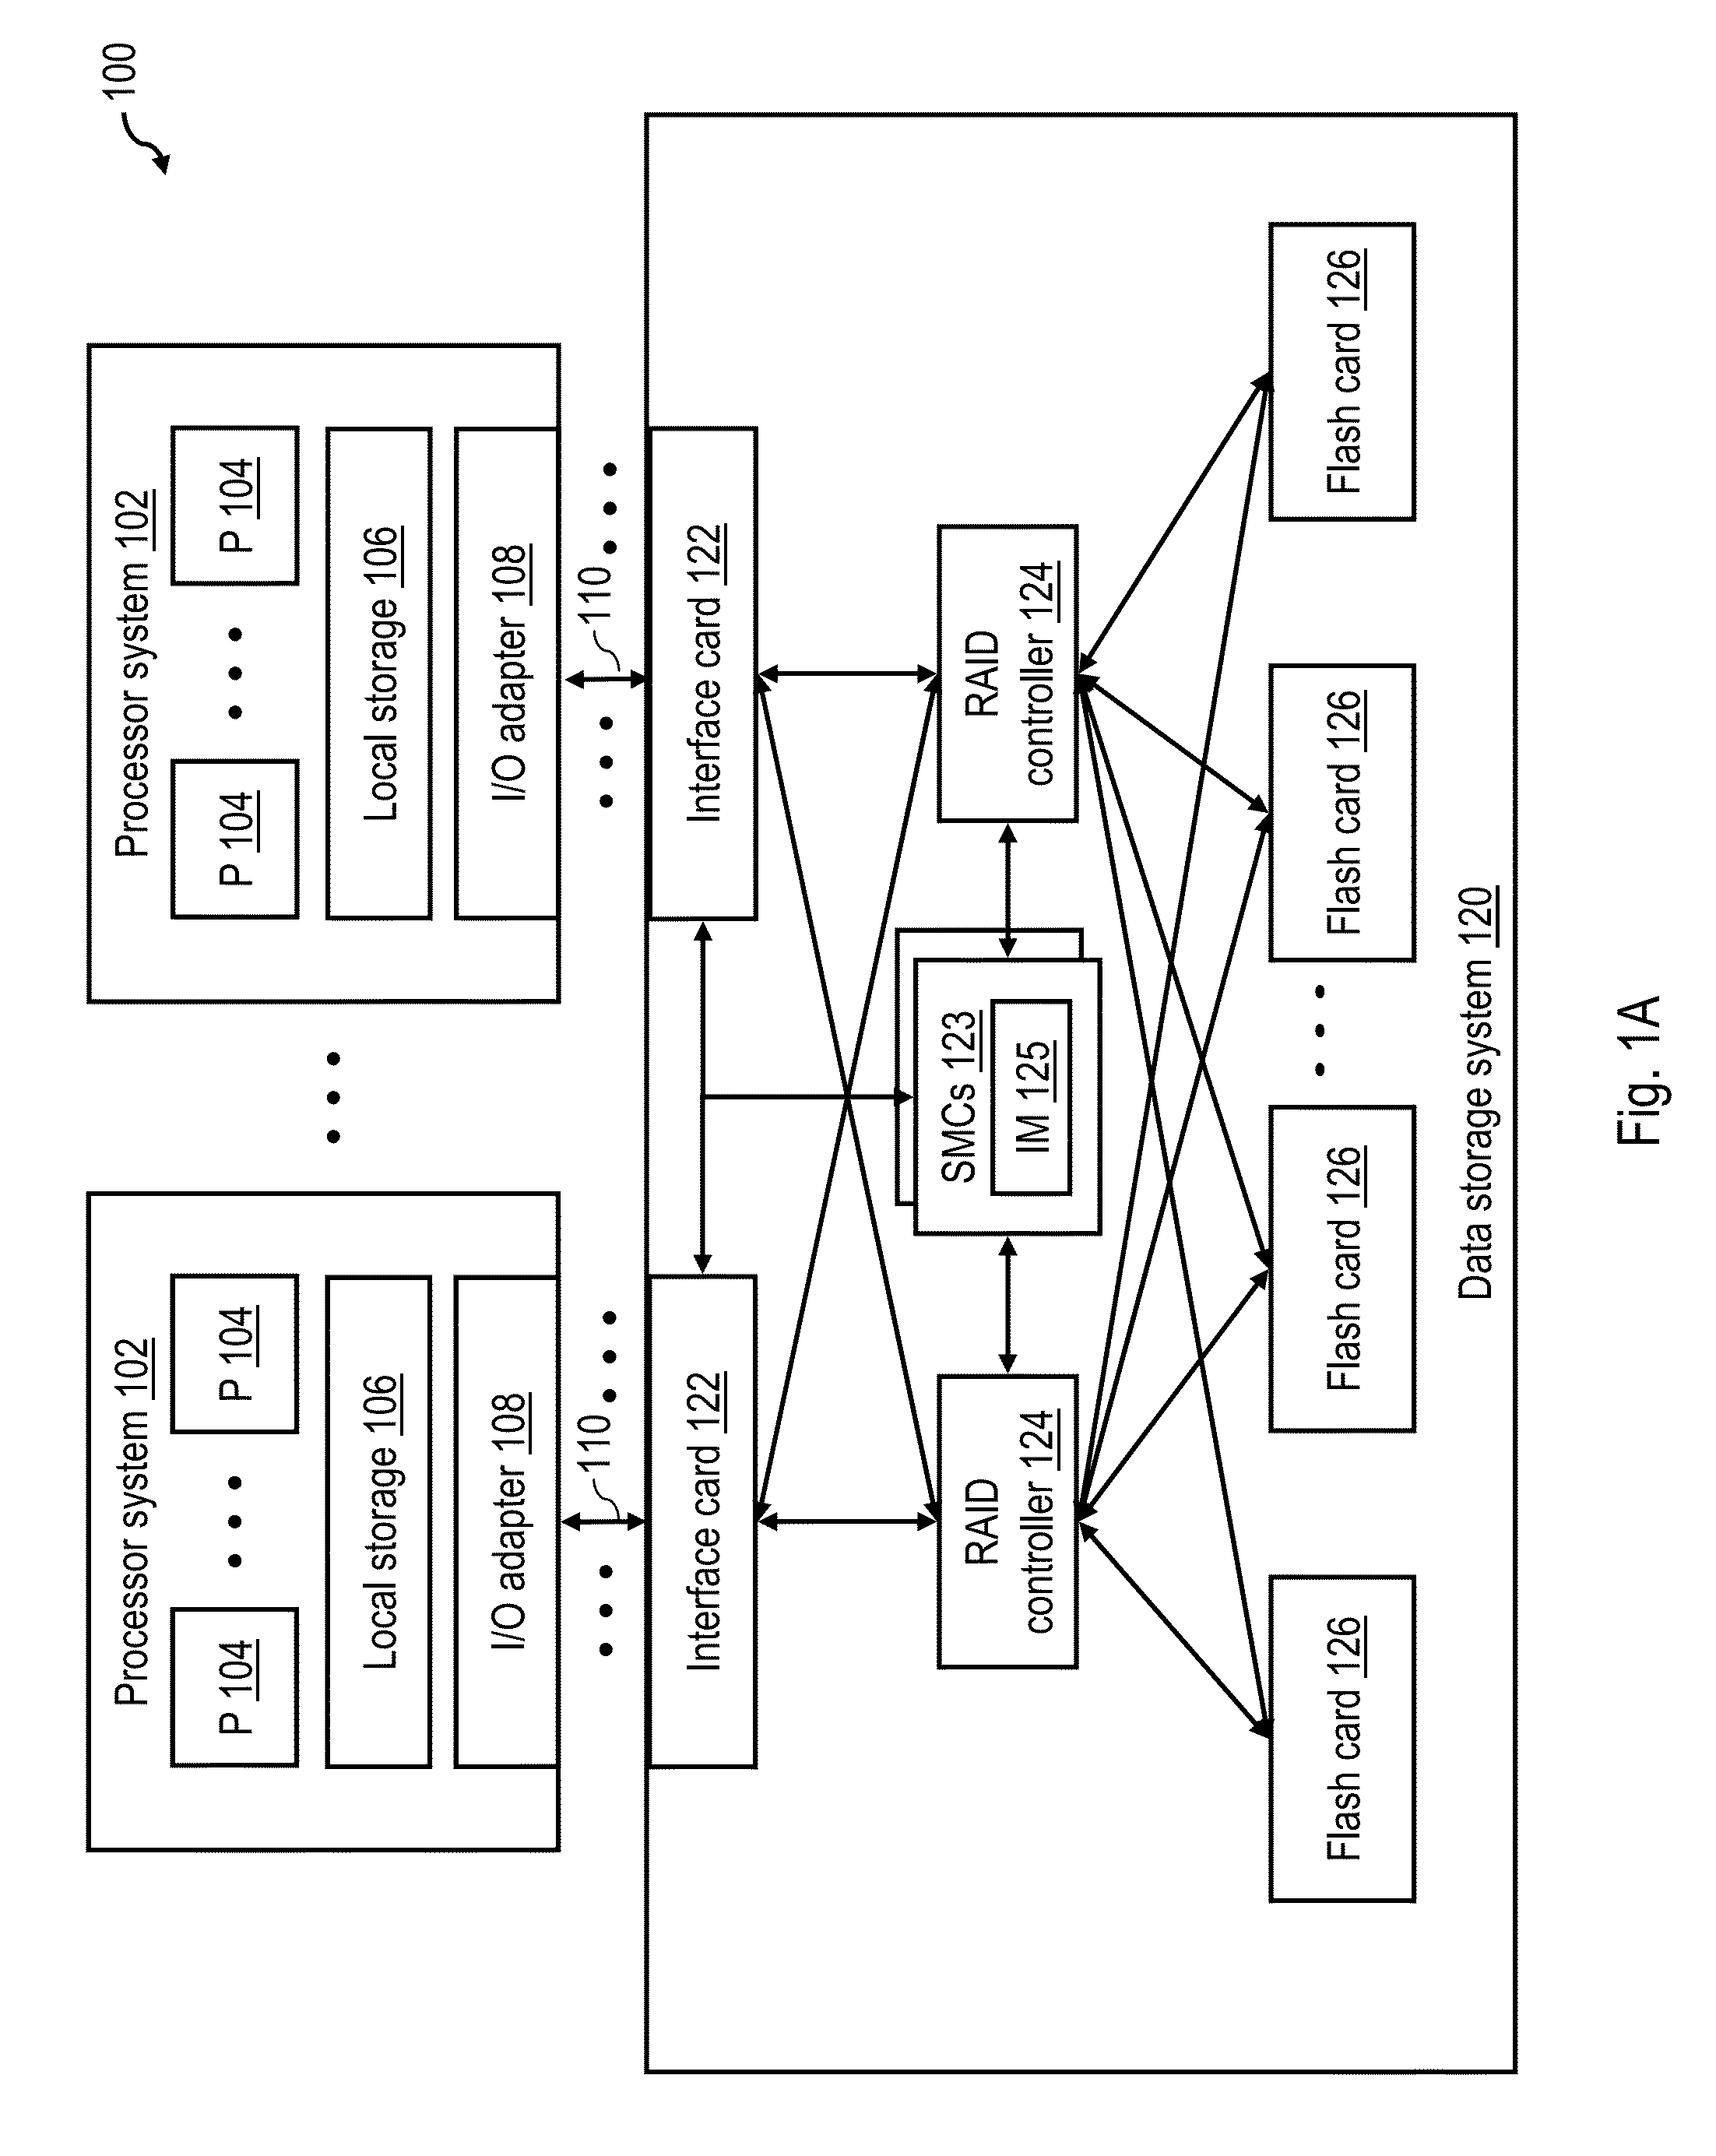 Data storage system employing a hot spare to store and service accesses to data having lower associated wear